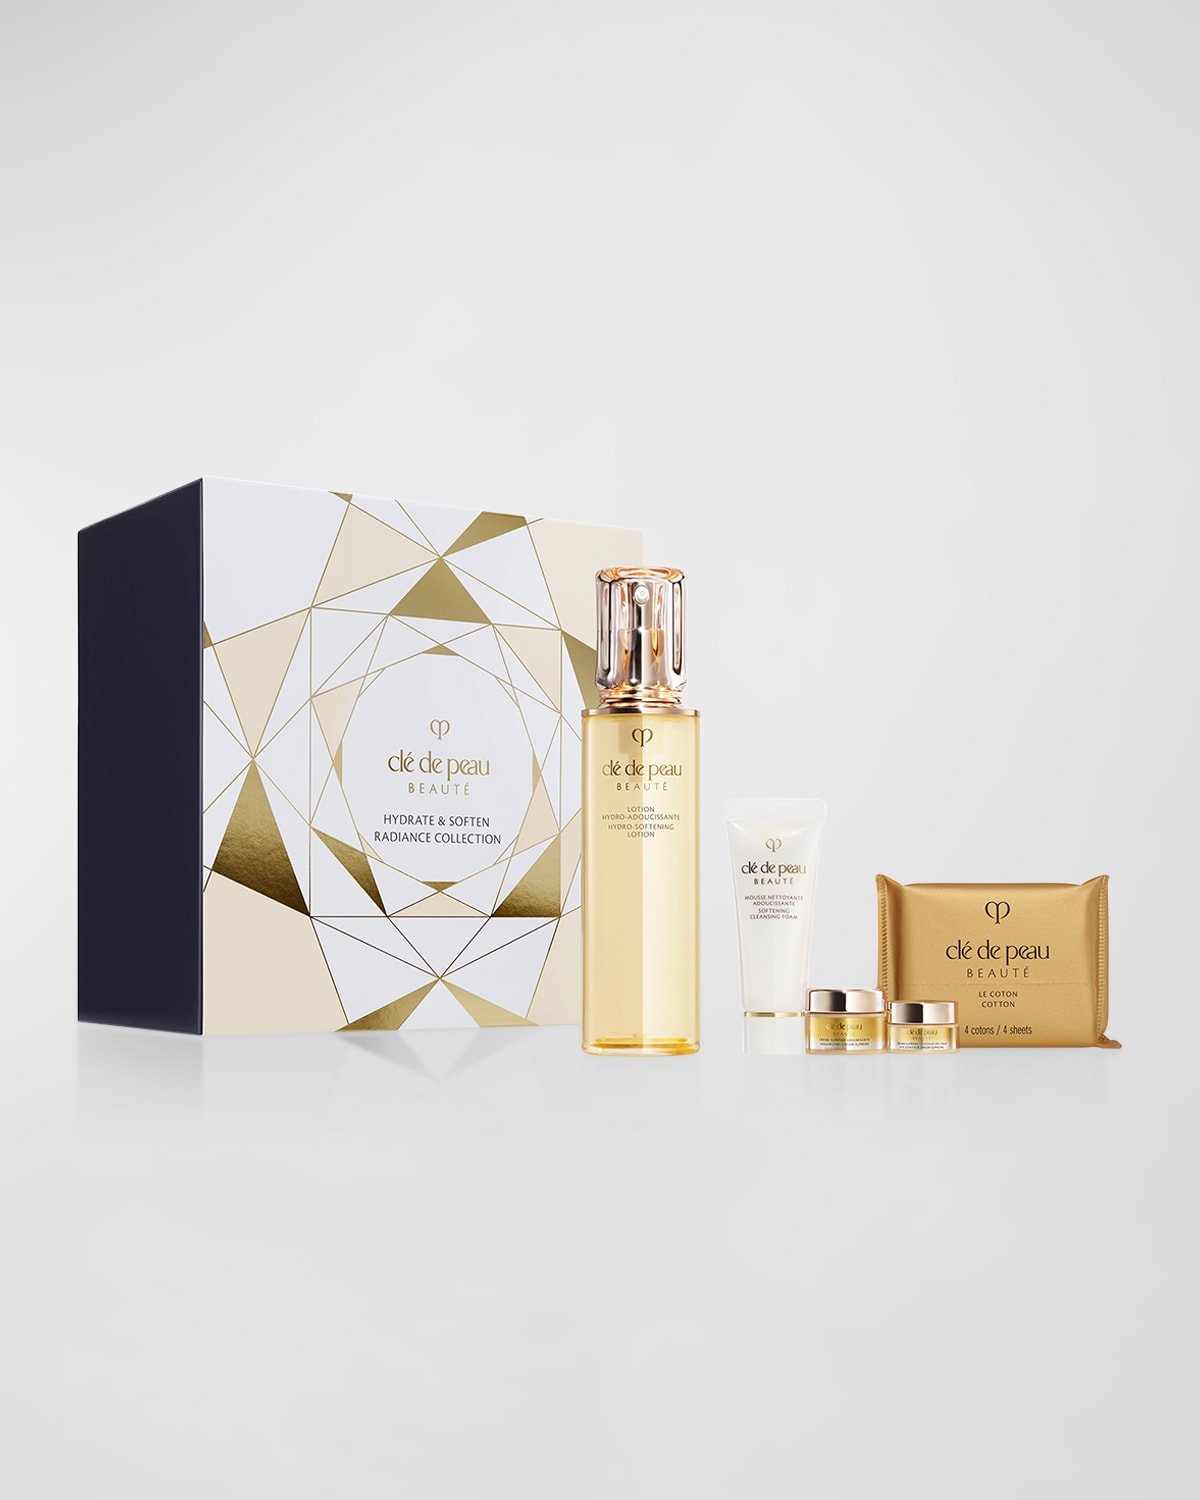 Limited Edition Hydrate & Soften Radiance Collection ($216 Value)